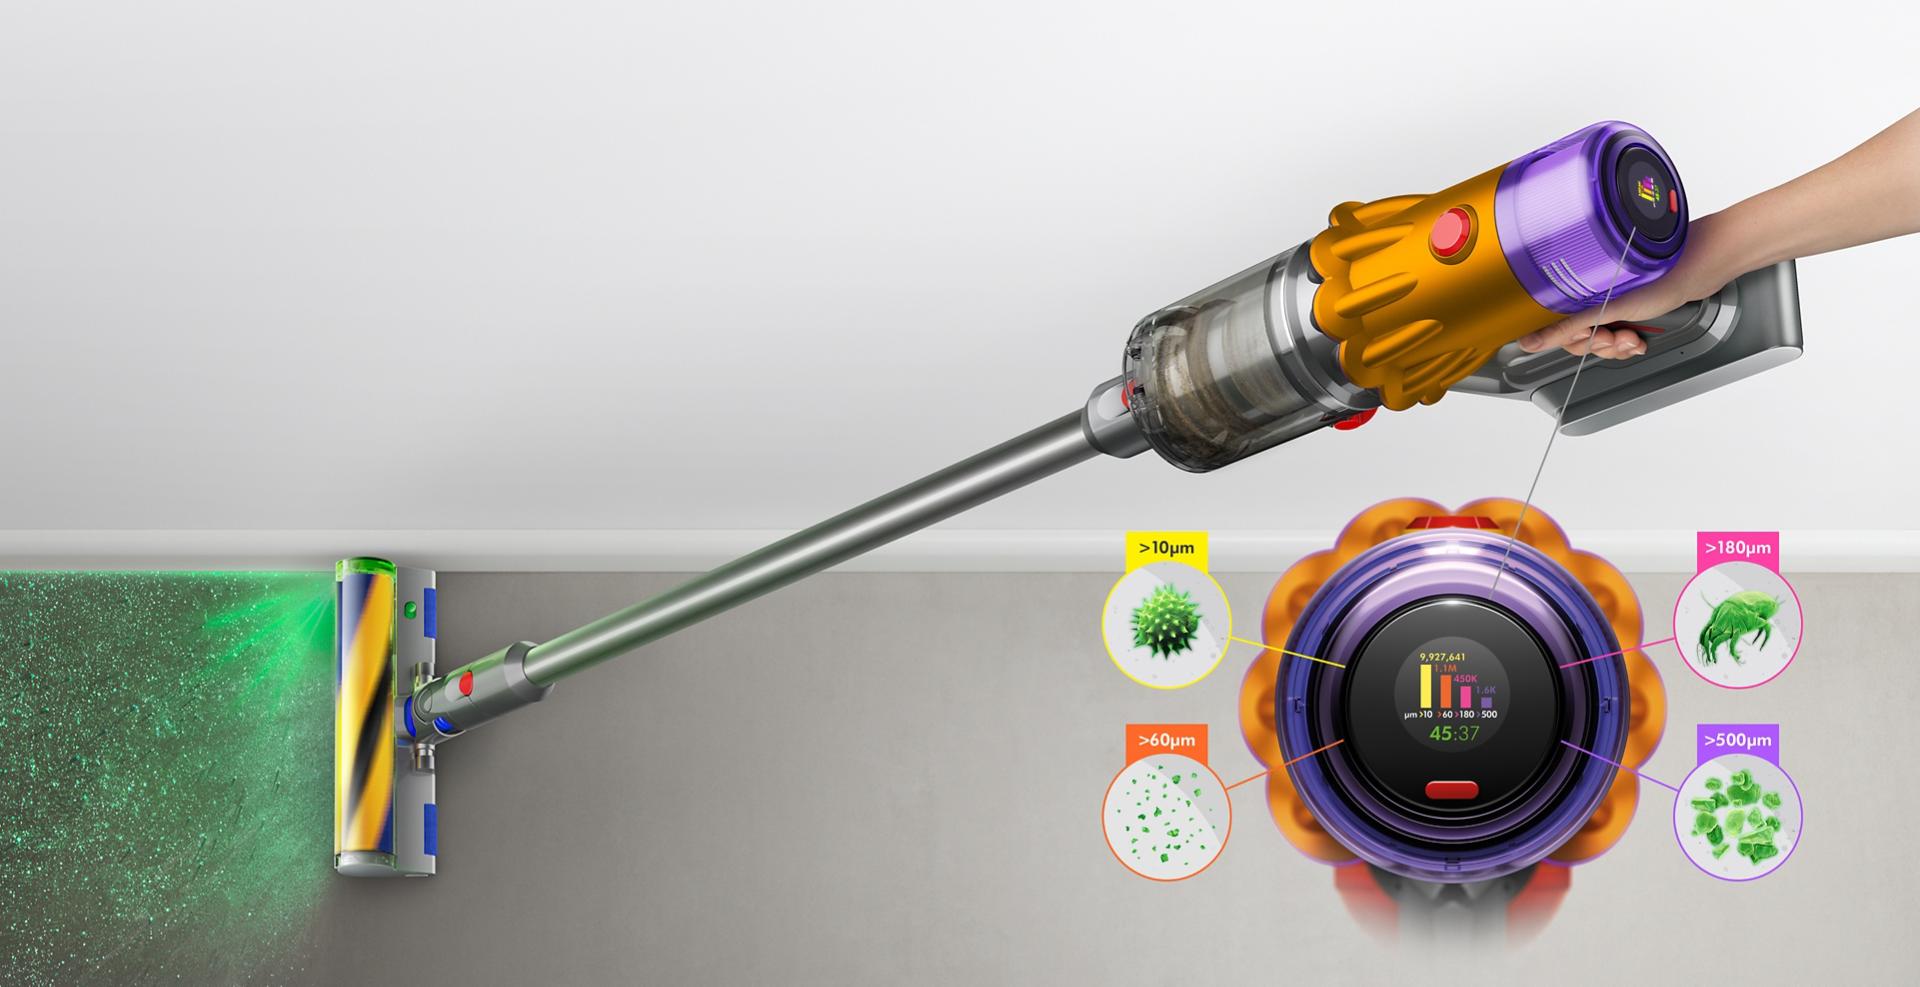 Dyson V12 Detect Slim vacuum with Slim Fluffy Laser cleaner head, showing sizes of dust detected for floors in your room/home